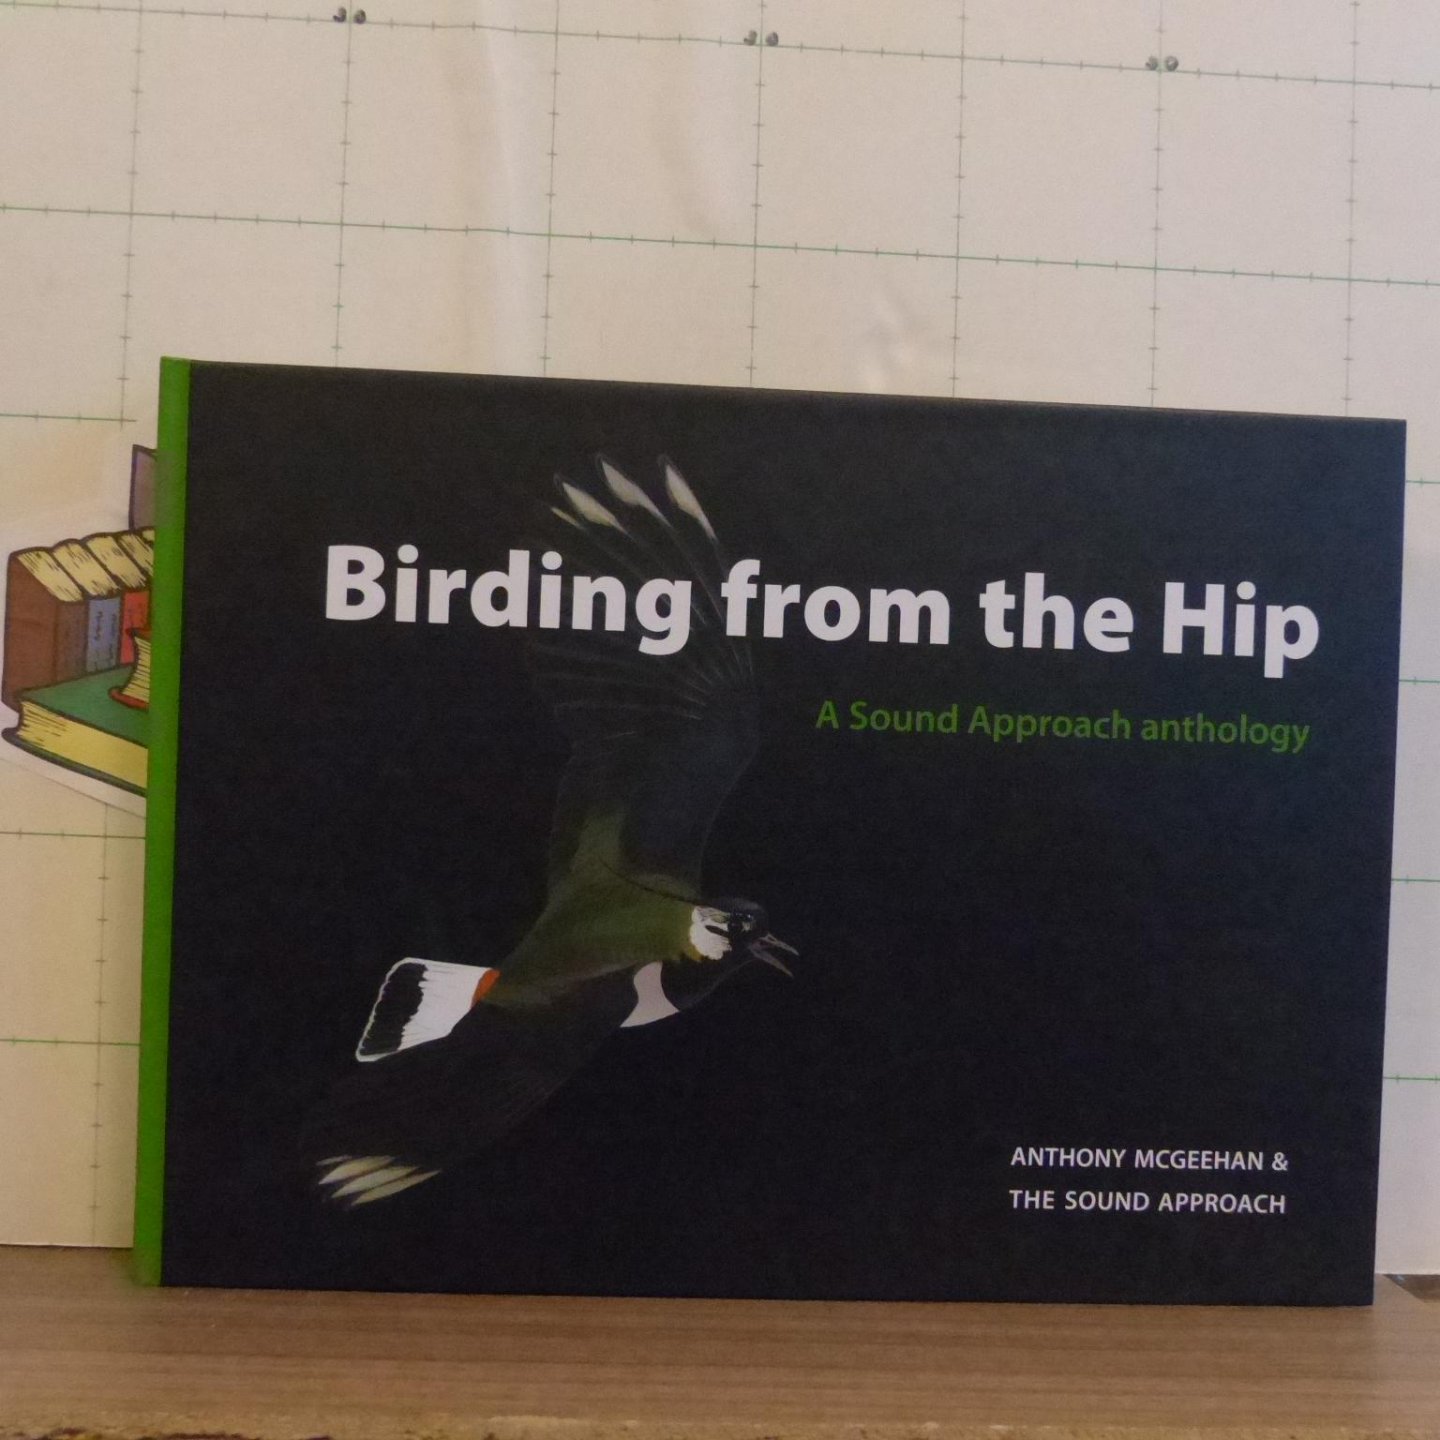 McGeehan, Anthony - the sound approach - birding from the hip, a sound approach anthology